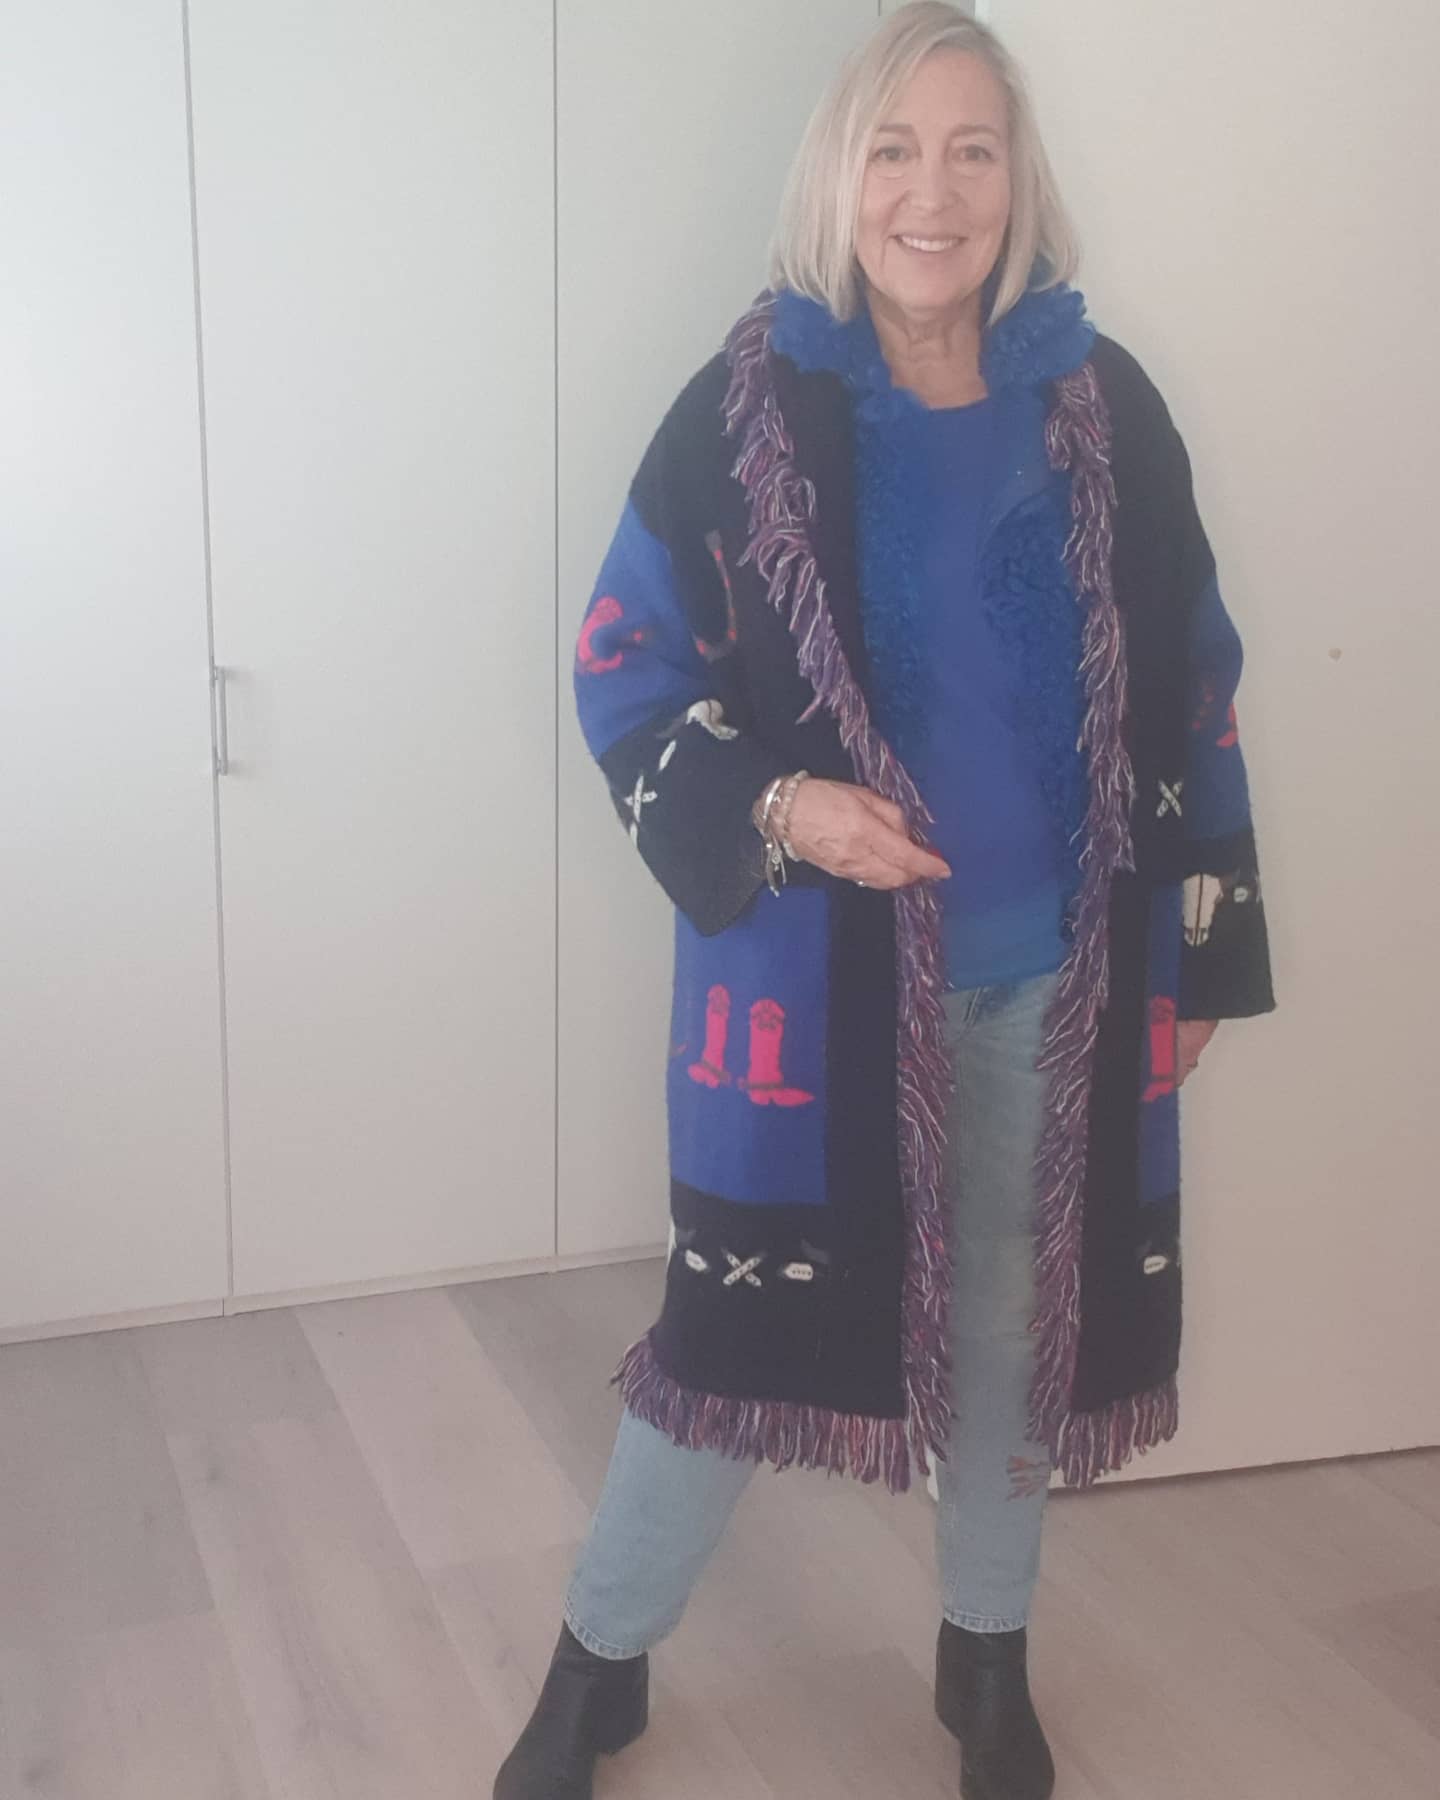 The art of layering to keep warm and still stylish for outdoors dining.
Everything from my own wardrobe from past seasons...
Wearing:
H&M long sleeve t-shirt
M&S cashmere sweater
JOSEPH furry gilet
ZARA cardigan
ZARA jeans
RiVER  ISLAND boots 
.
.
.